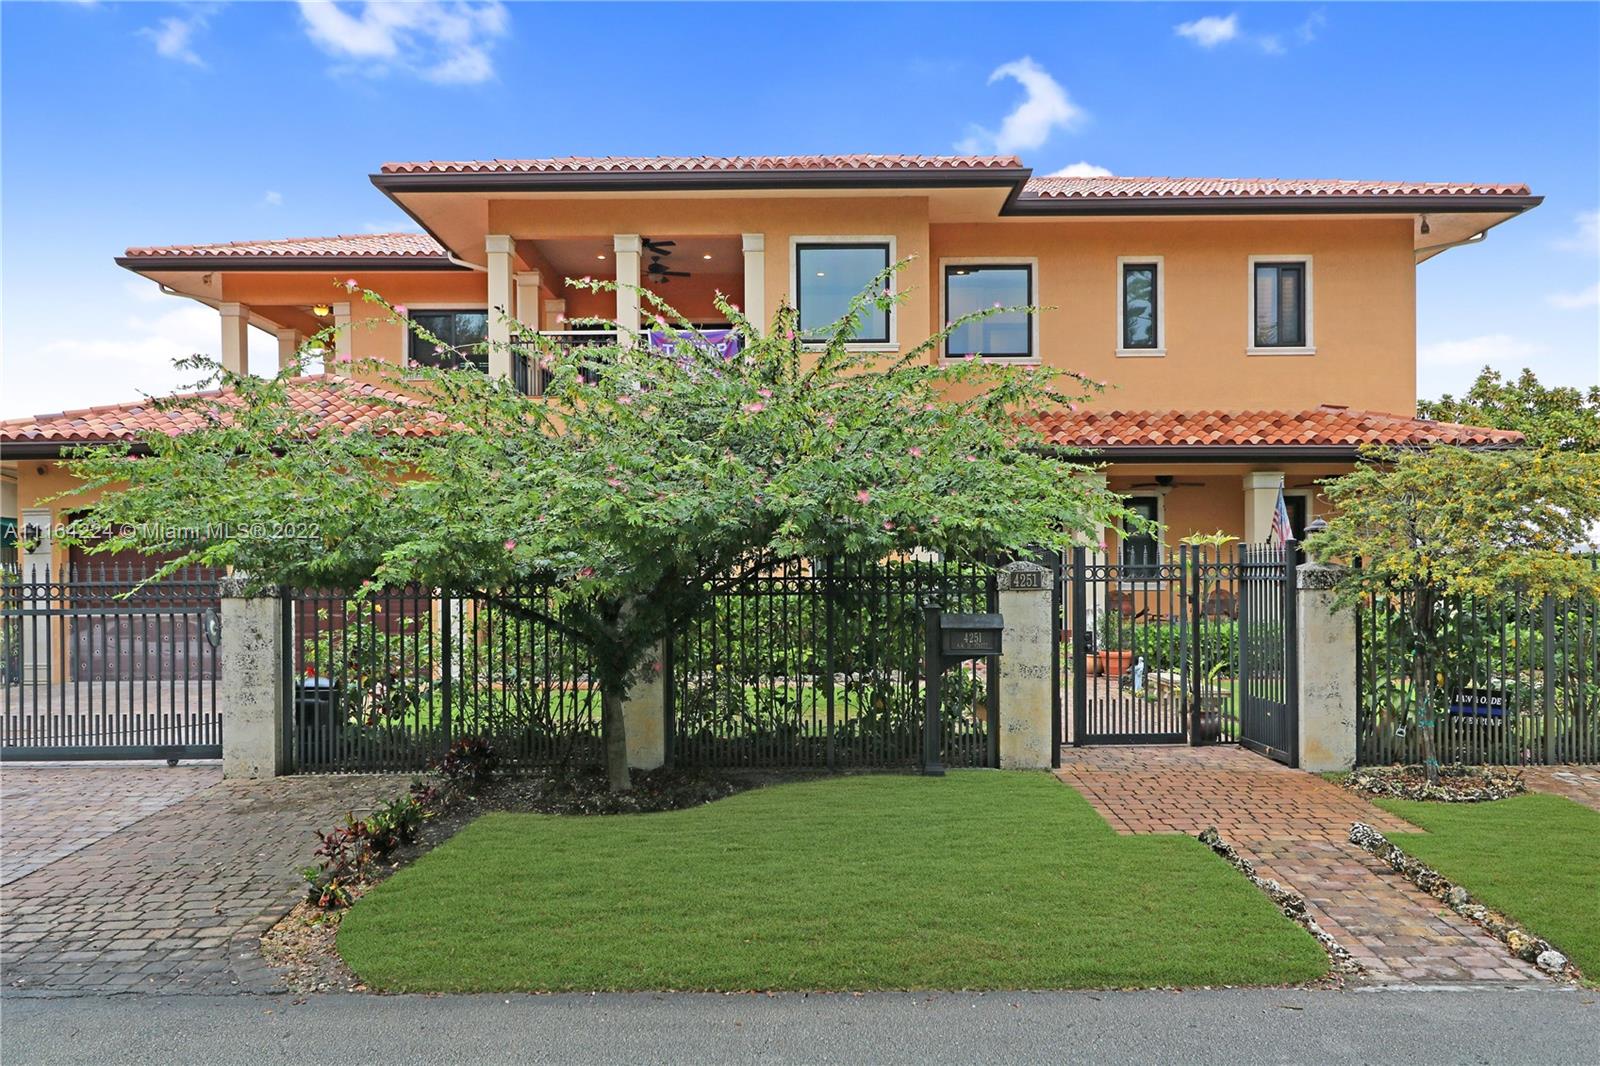 Our Lady’s Bunker is in proximity to the charming businesses and top restaurants of Coral Gables at a fraction of the property taxes. This custom built 2017 Spanish styled home was built above Miami Dade County specifications for an everlasting home that in an emergency would remain fully operational off the grid. The home is constructed of metal and concrete without the use of any wood for the structure of the home. The home features 4 bedrooms and 4 full baths, plus a small sleeping room underneath the staircase and a Chapel. The kitchen is very large and tastefully designed w/granite counter and backsplash including an island prep station with an additional sink. A truly custom home that can only be appreciated by the understanding of the everlasting construction details behind it.